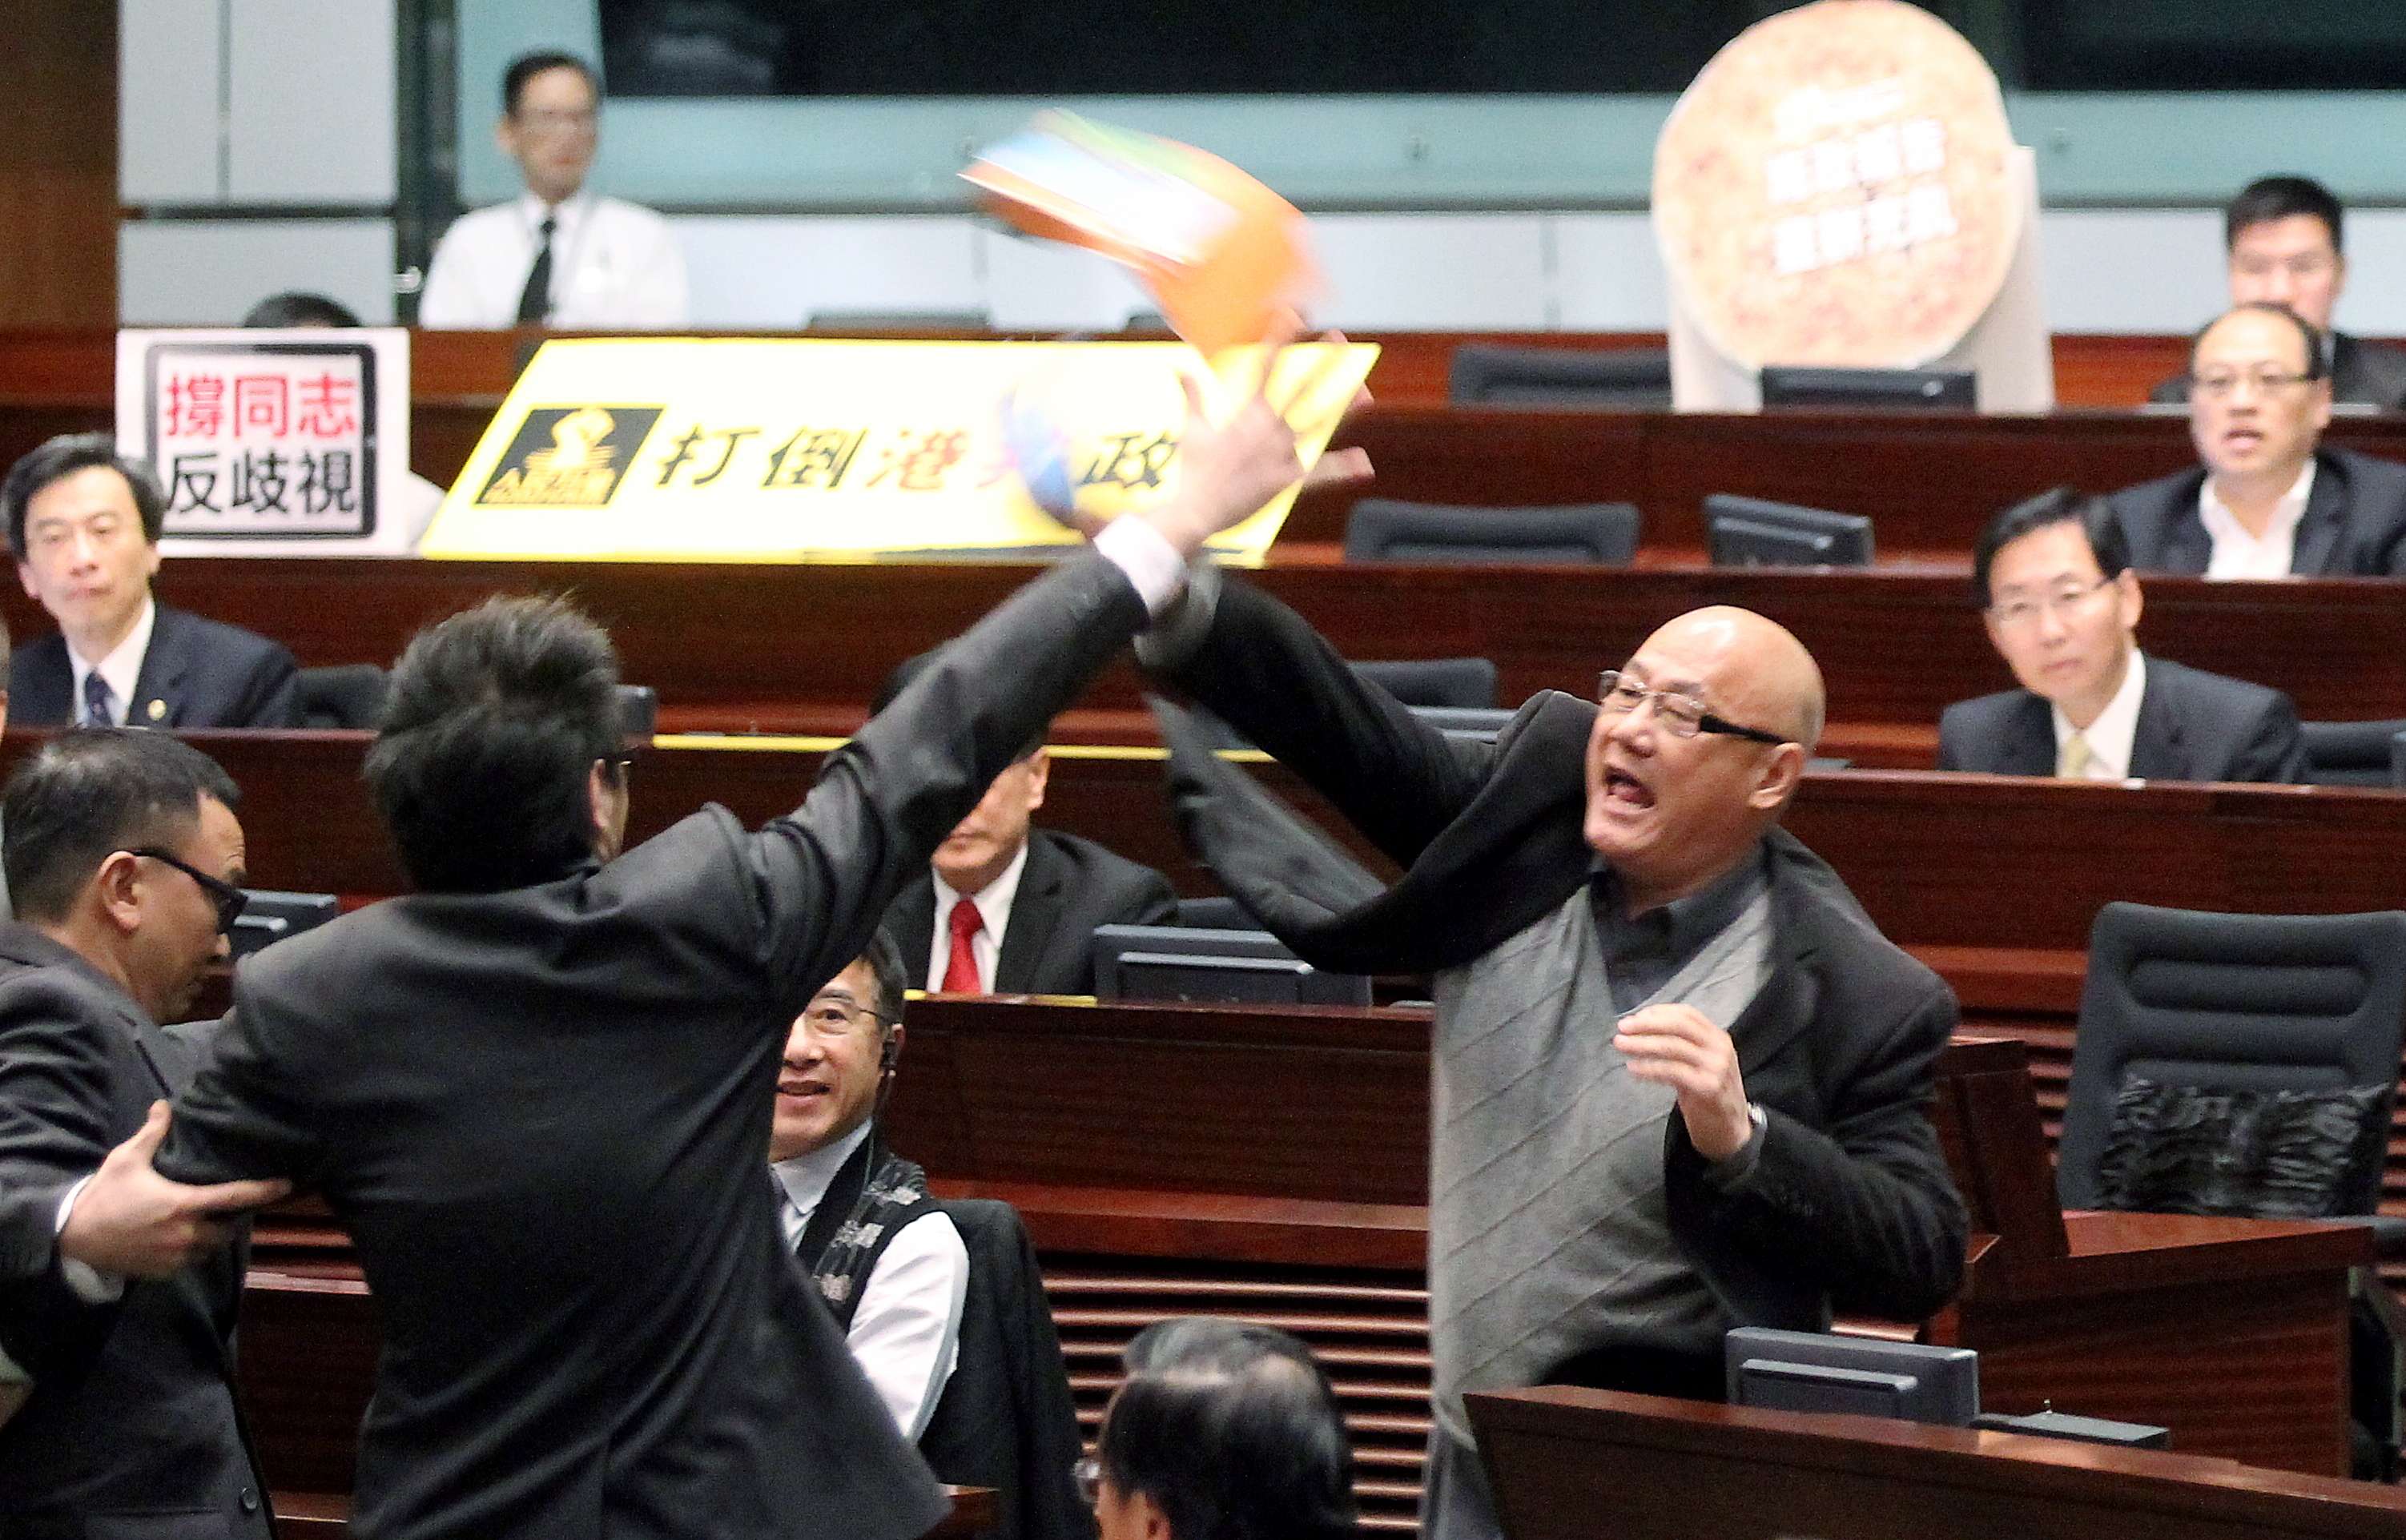 The frequent protests and throwing of objects in the Legco chamber have become one big yawn. Photo: Edward Wong